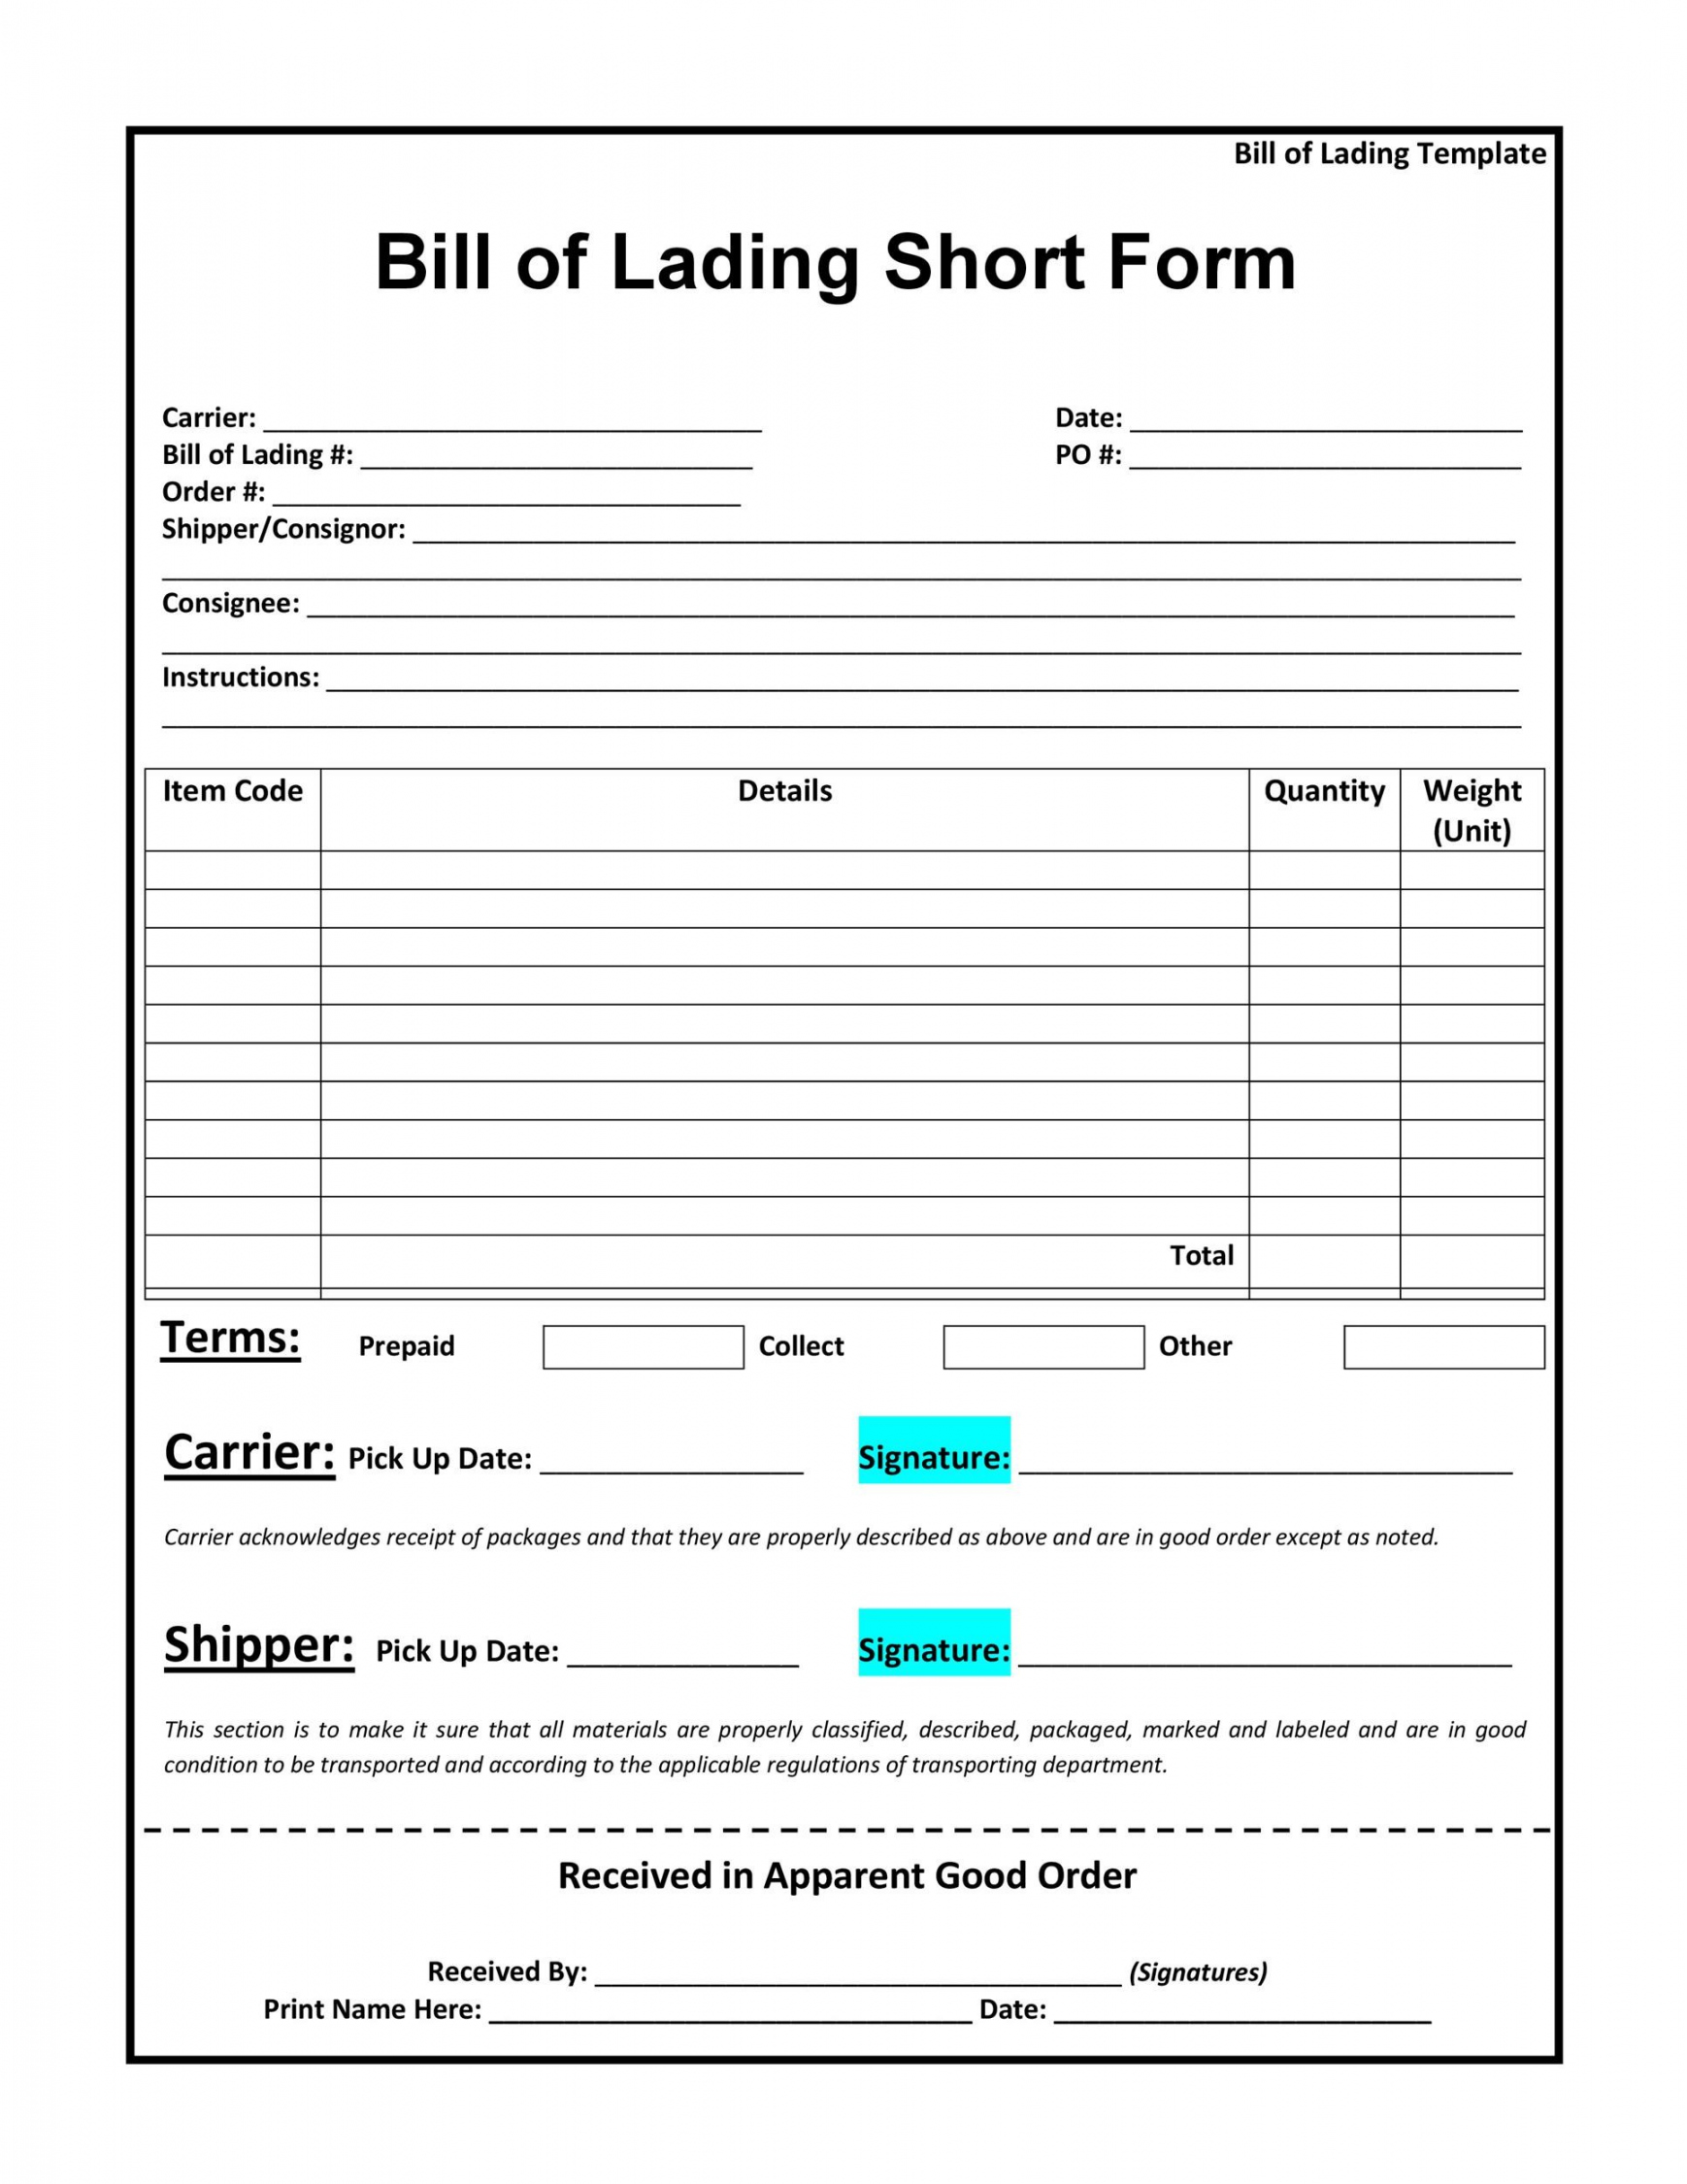 Free Bill of Lading Forms & Templates ᐅ TemplateLab - FREE Printables - Free Printable Bill Of Lading